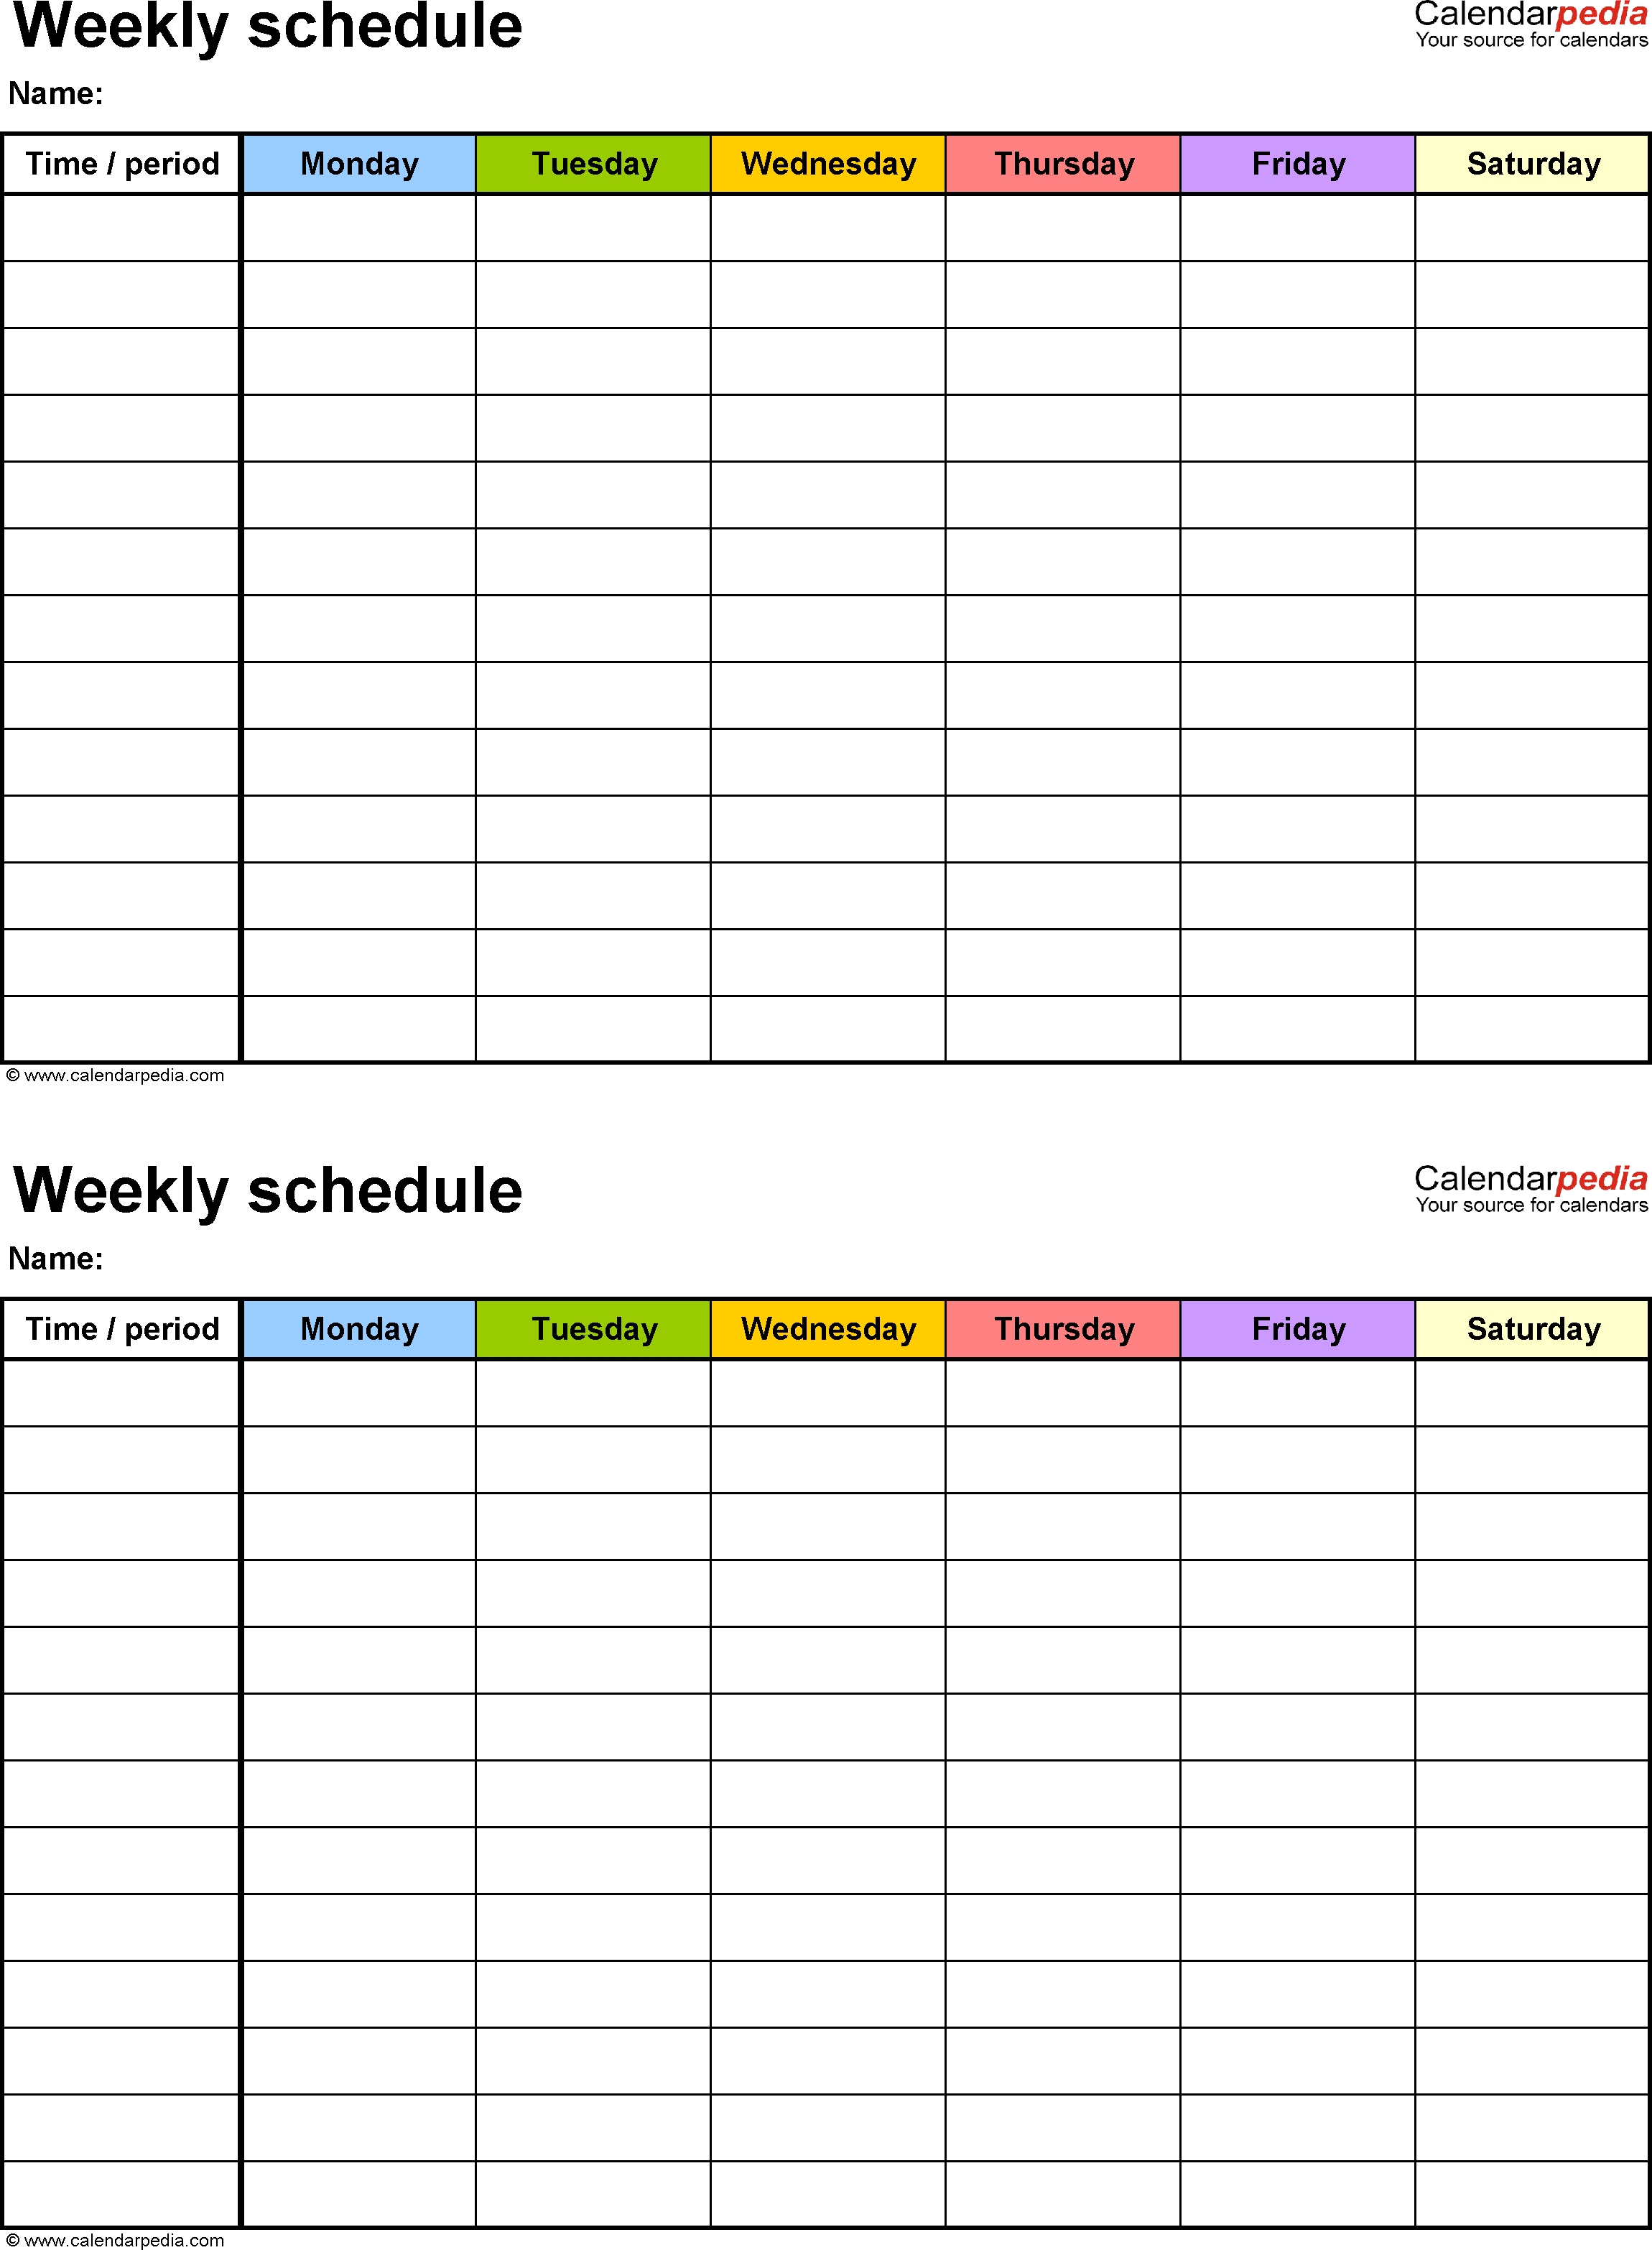 Free Weekly Schedule Templates For Excel - 18 Templates pertaining to Printable Weekly Schedule Flow Chart